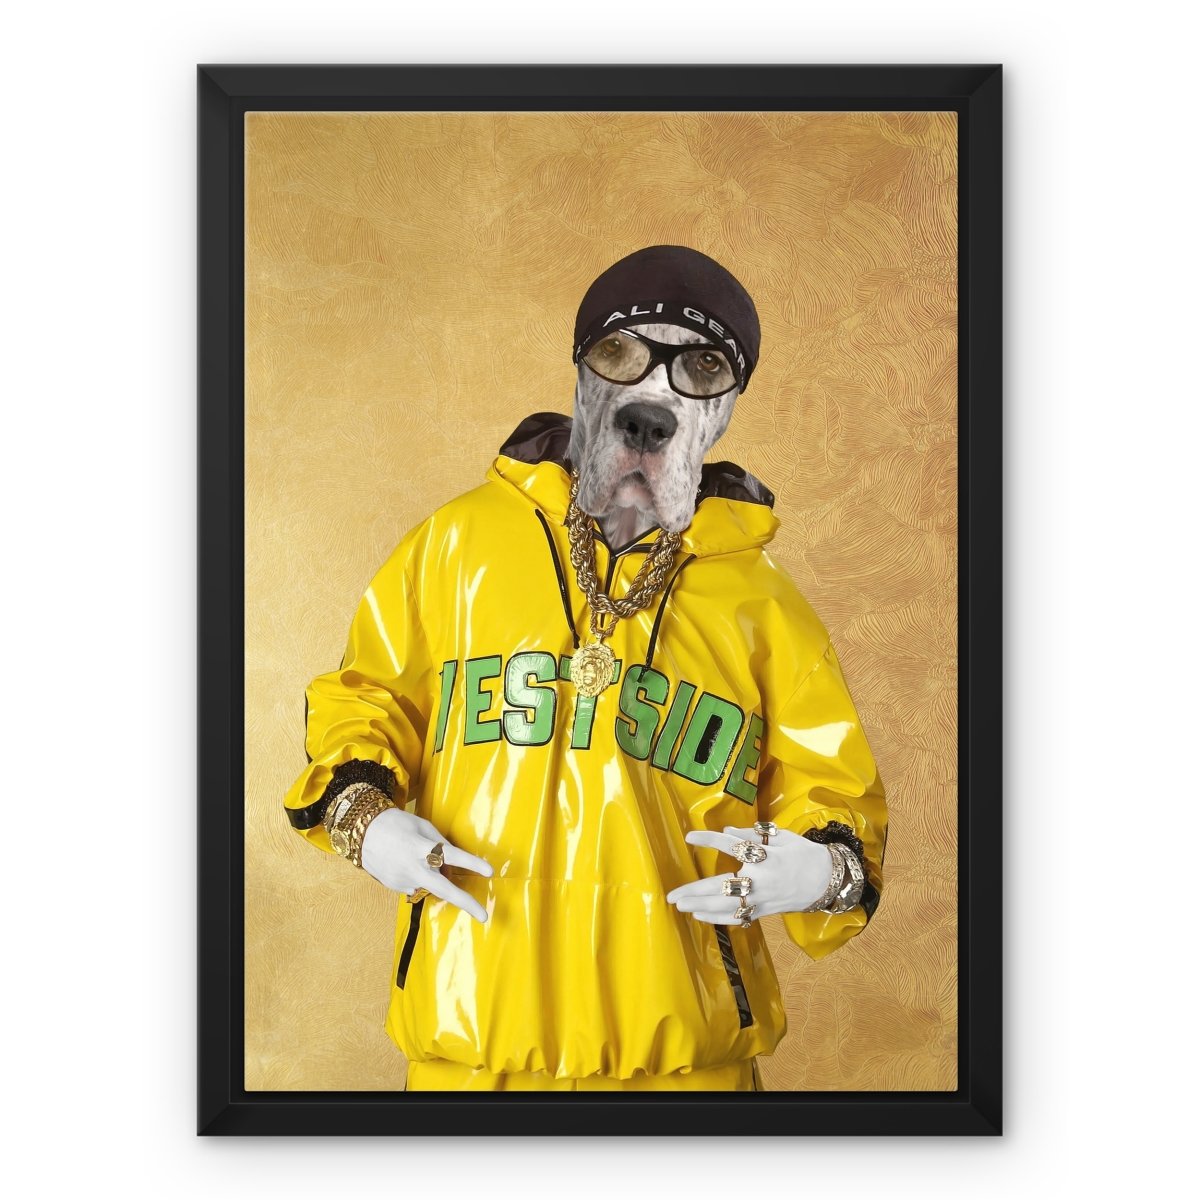 Ali G: Custom Pet Canvas - Paw & Glory - #pet portraits# - #dog portraits# - #pet portraits uk#paw and glory, custom pet portrait canvas,dog pictures on canvas, dog wall art canvas, pet photo canvas, personalized dog and owner canvas uk, the pet canvas